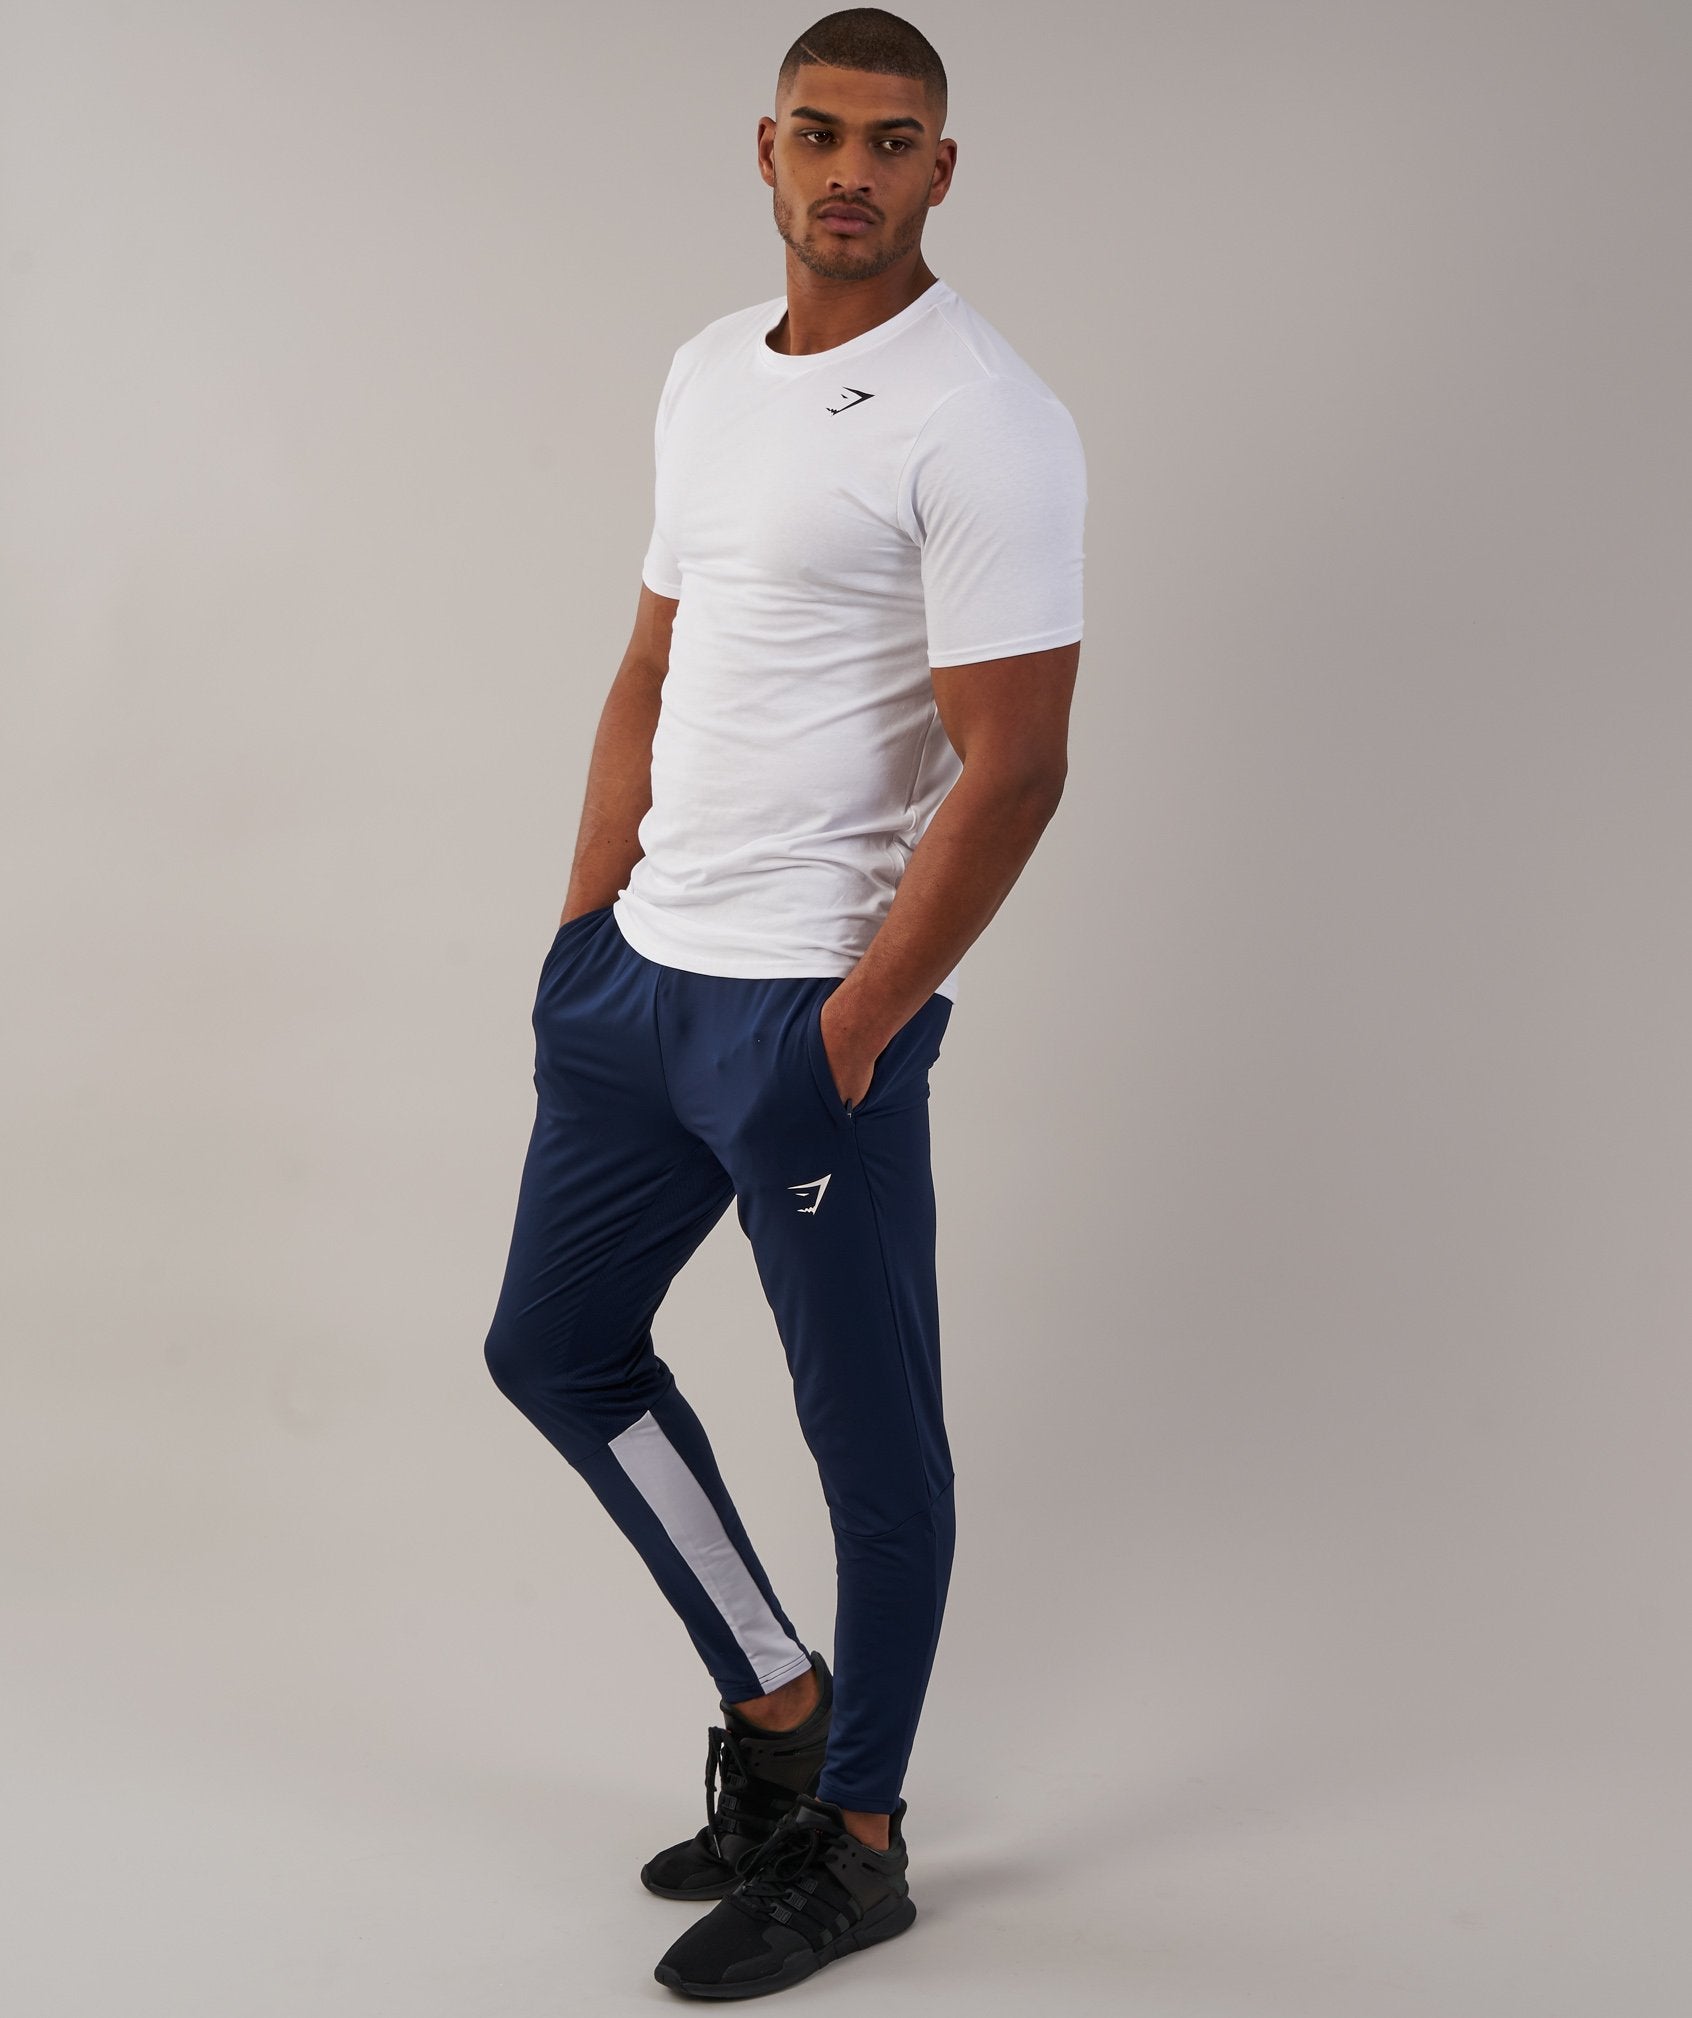 Reactive Training Bottoms in Sapphire Blue/White - view 4